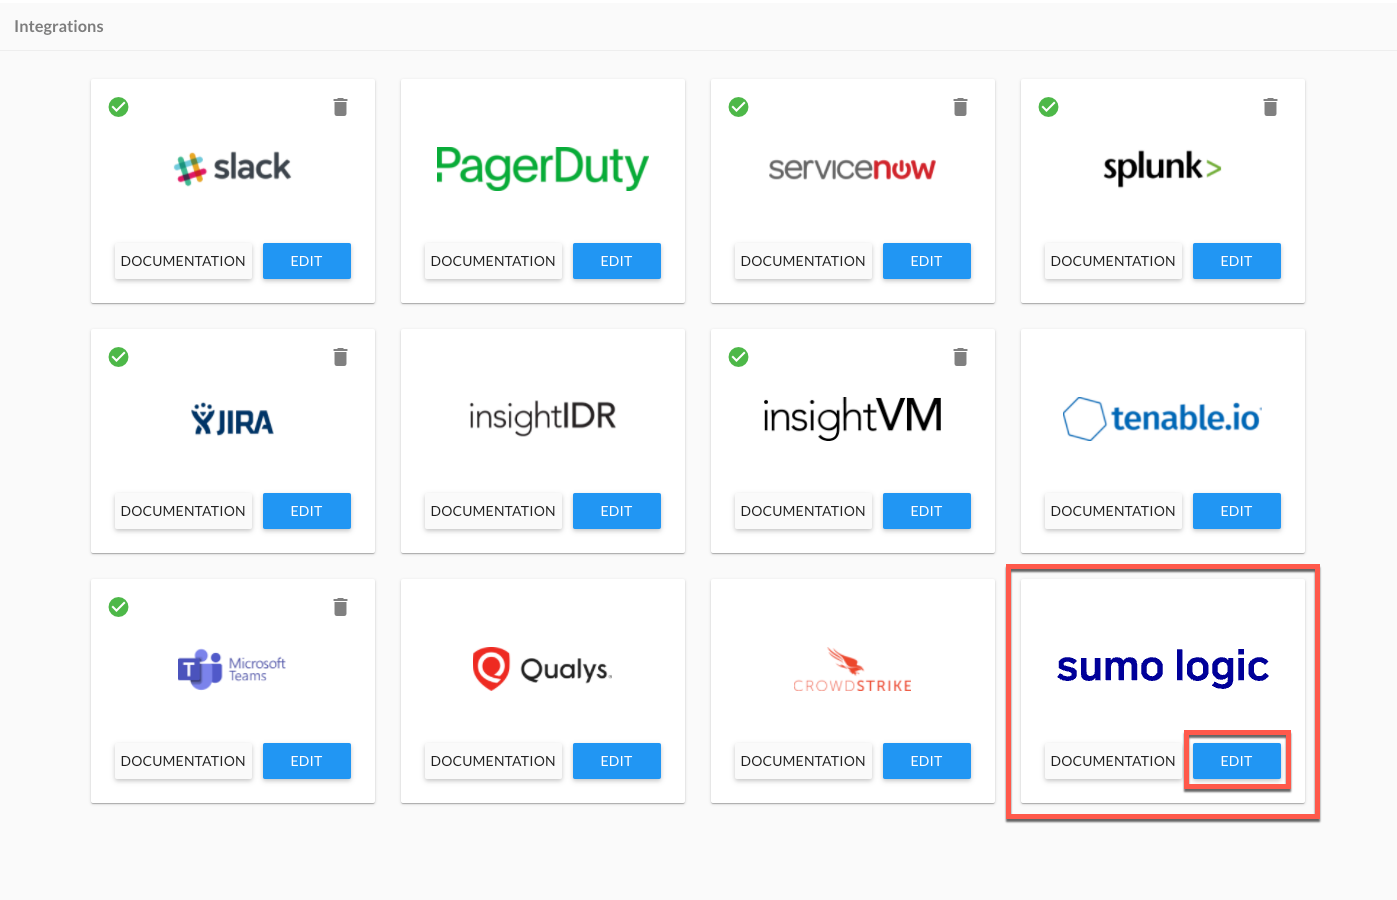 Sumo Logic on the Integrations Landing Page